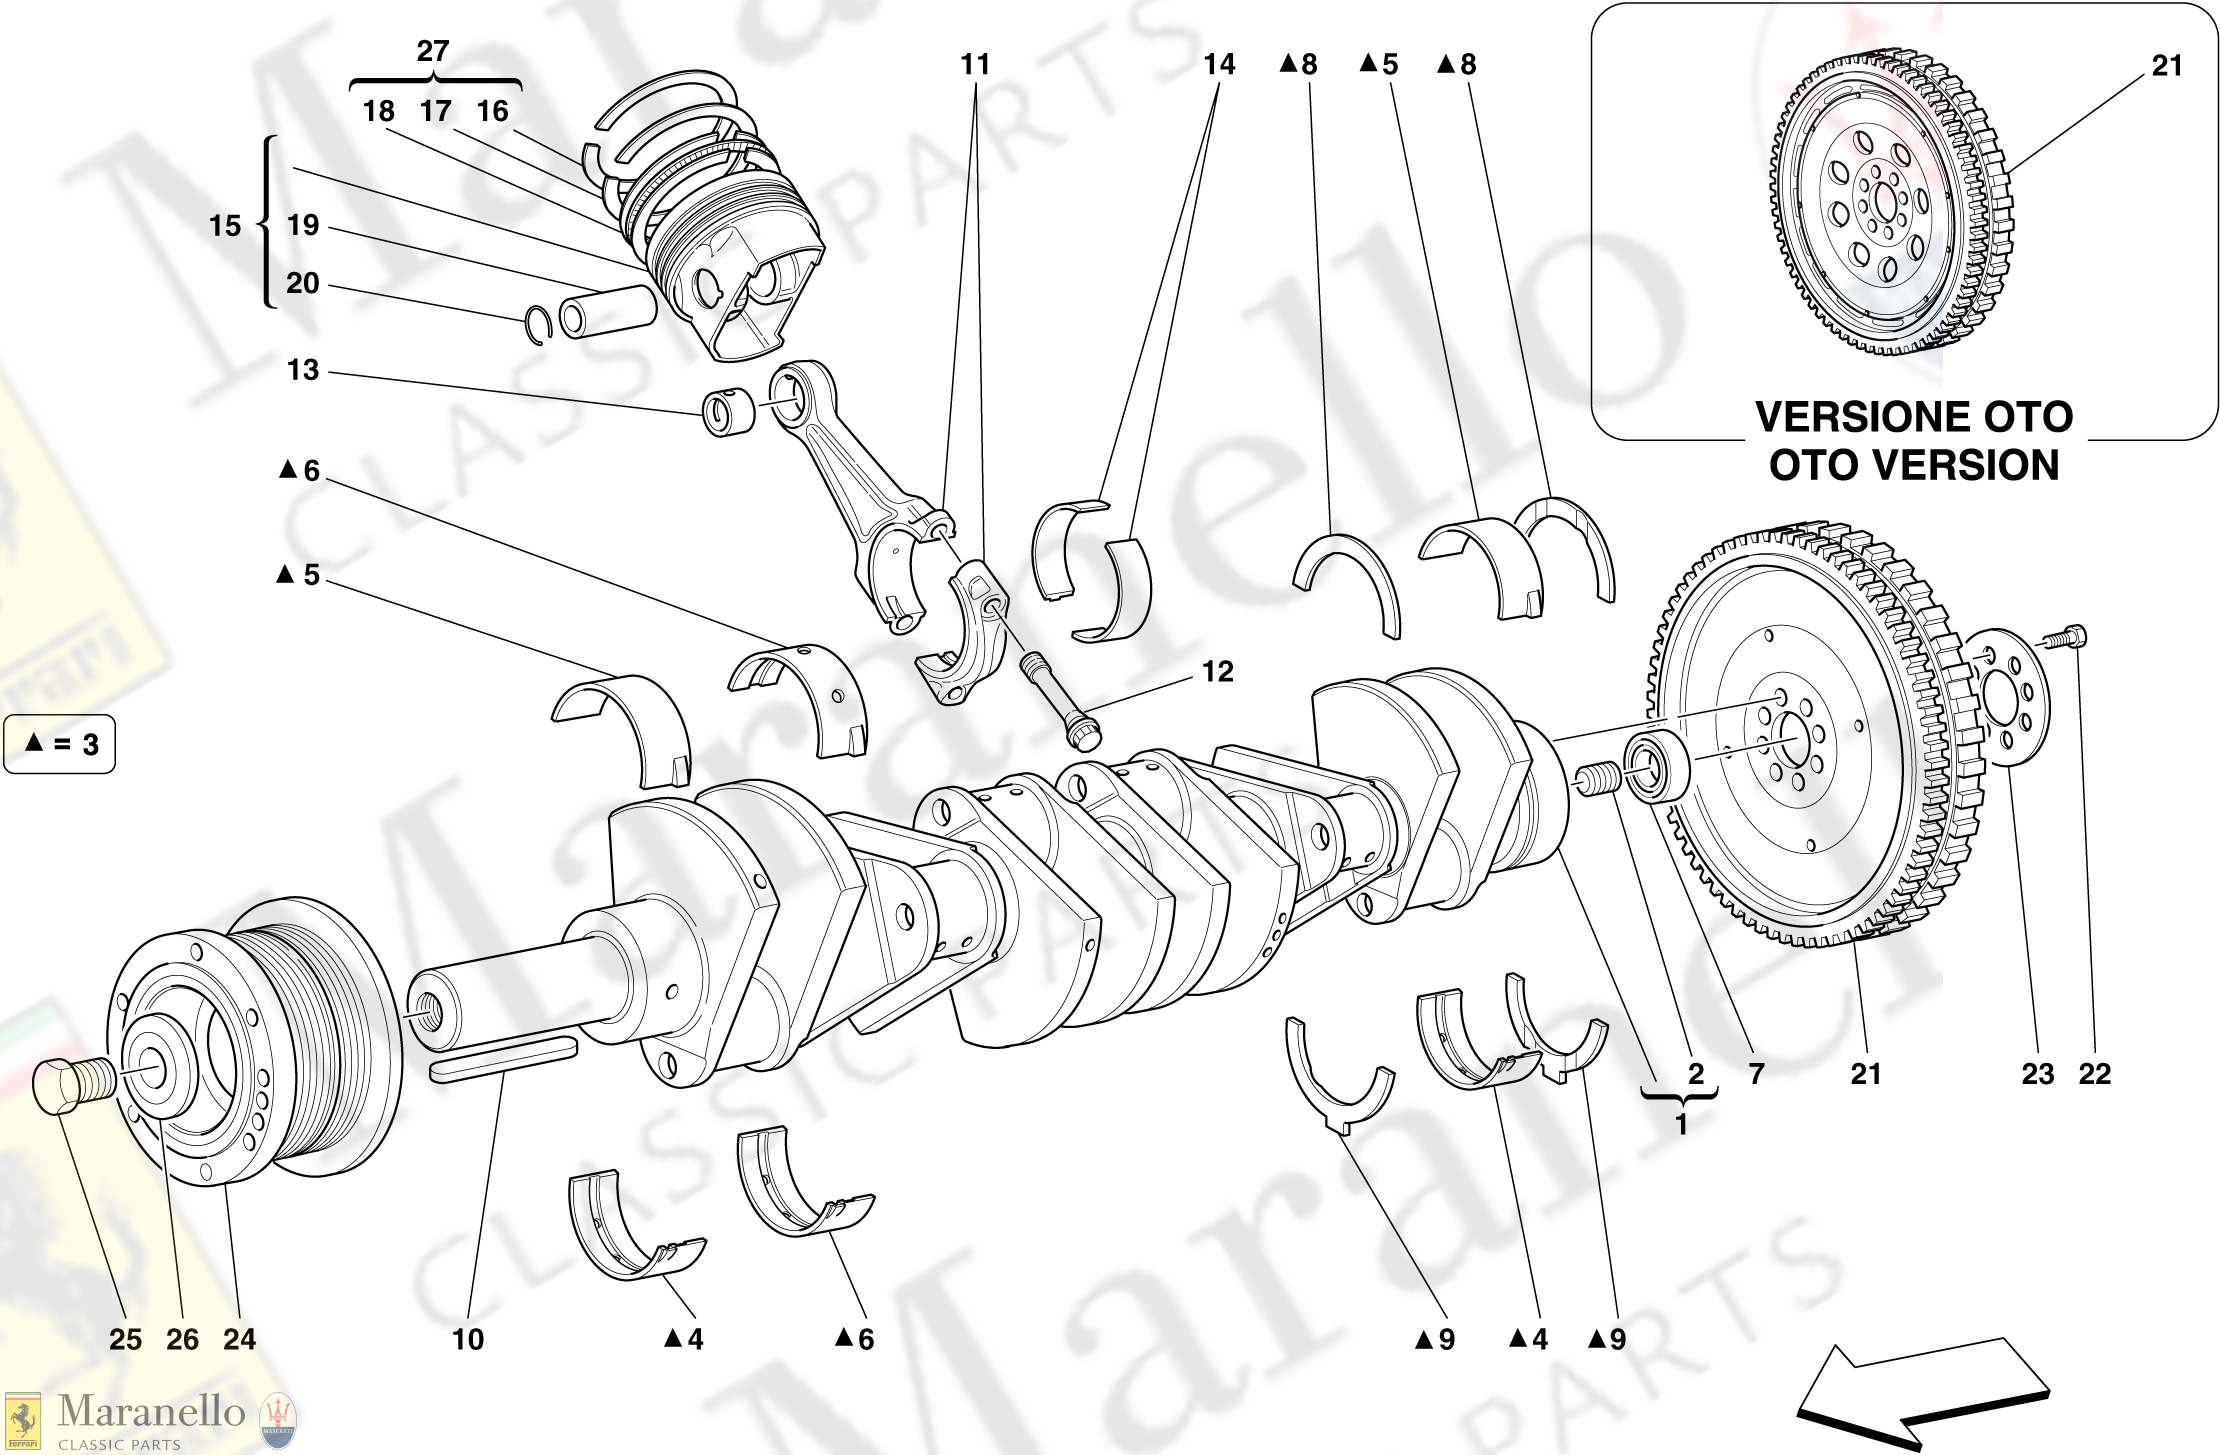 003 - Crankshaft - Connecting Rods And Pistons